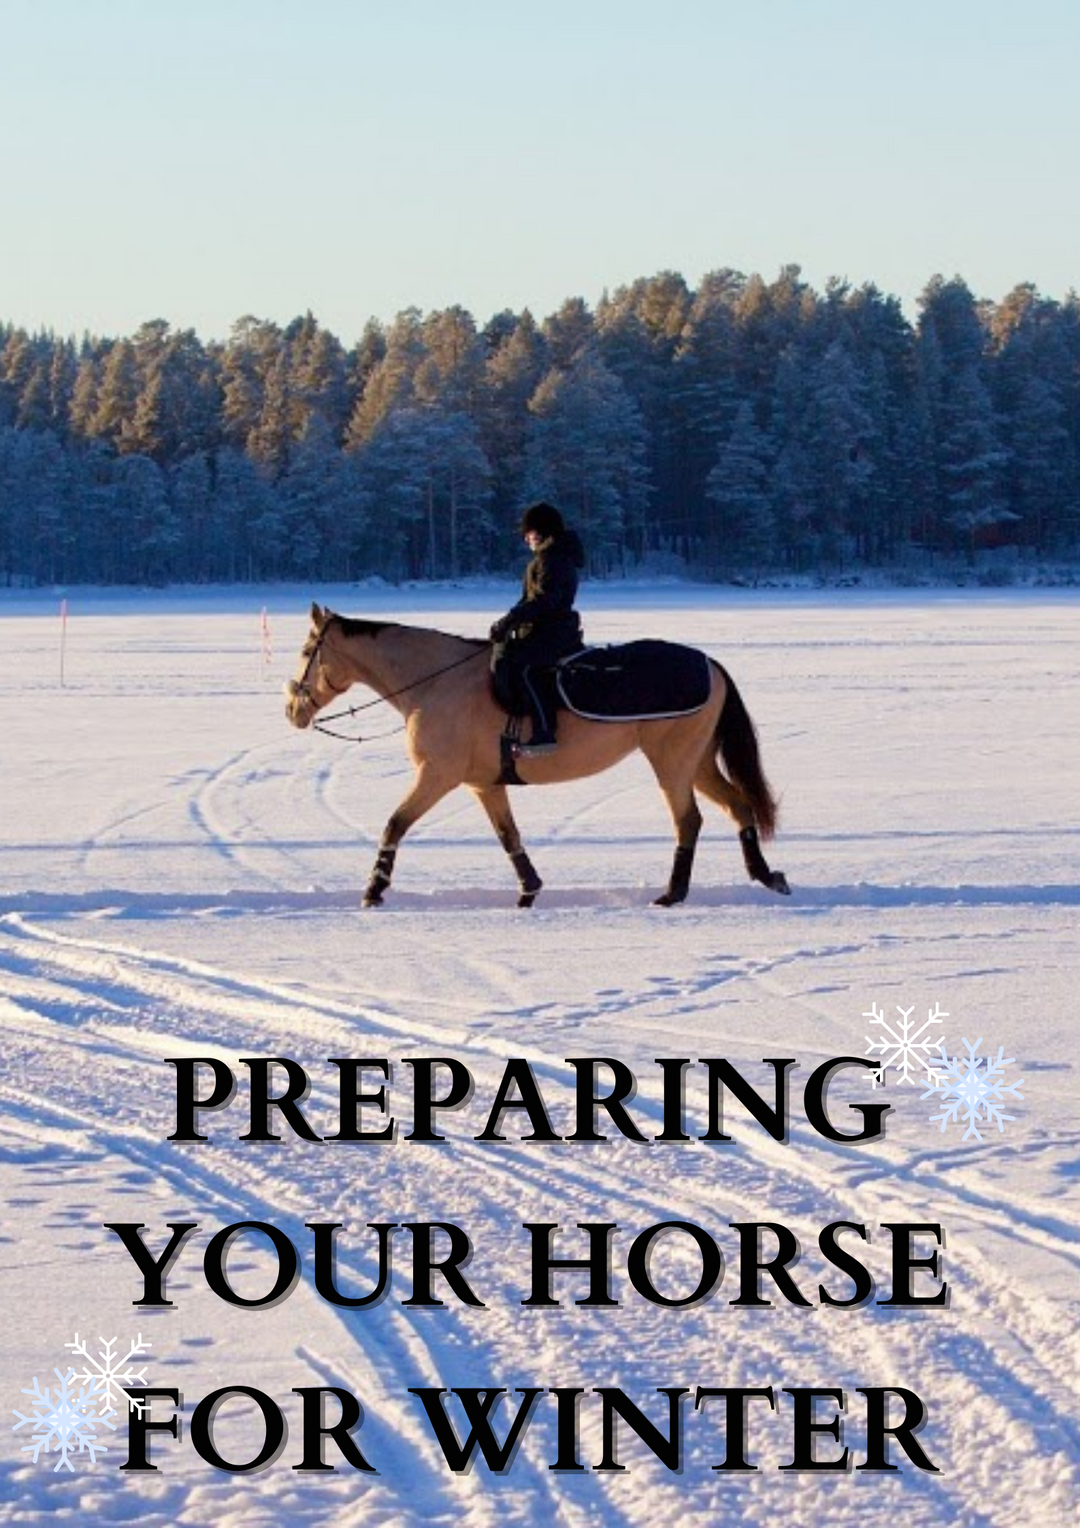 PREPARING YOUR HORSE FOR WINTER